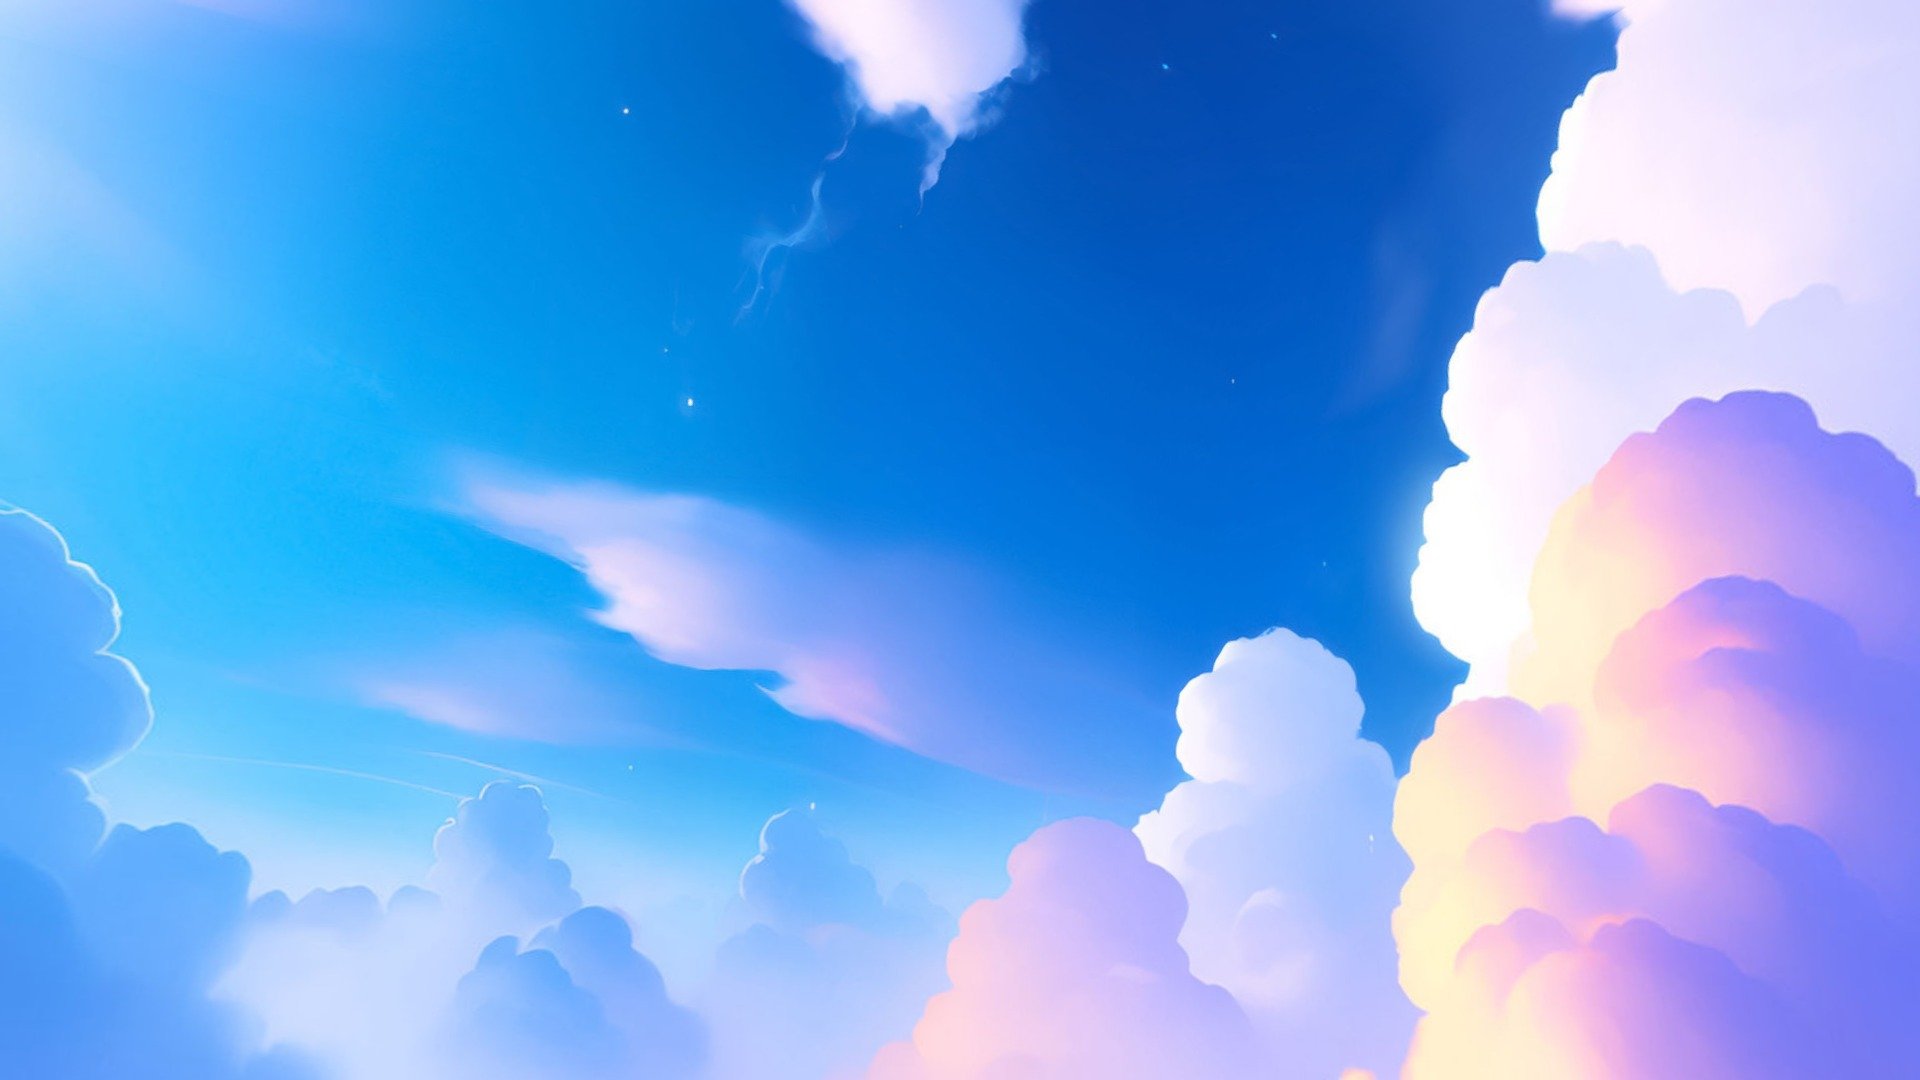 Beautiful stylized dreamy skybox. Perfect for beautiful, stylized environments and your rendering scene.

The package contains one panorama texture and one cubemap texture (png)




panorama texture: 6144 x 3072 

cubemap texture:  6144 x 4608

The sizes can be changed in your graphics program as desired



used: AI, Photoshop

*-------------Terms of Use--------------

Commercial use of the assets  provided is permitted but cannot be included in an asset pack or sold at any sort of asset/resource marketplace or be shared for free* - 6k Stylized Cloudy Skybox 003 - Buy Royalty Free 3D model by Stylized Box (@Stylized_Box) 3d model